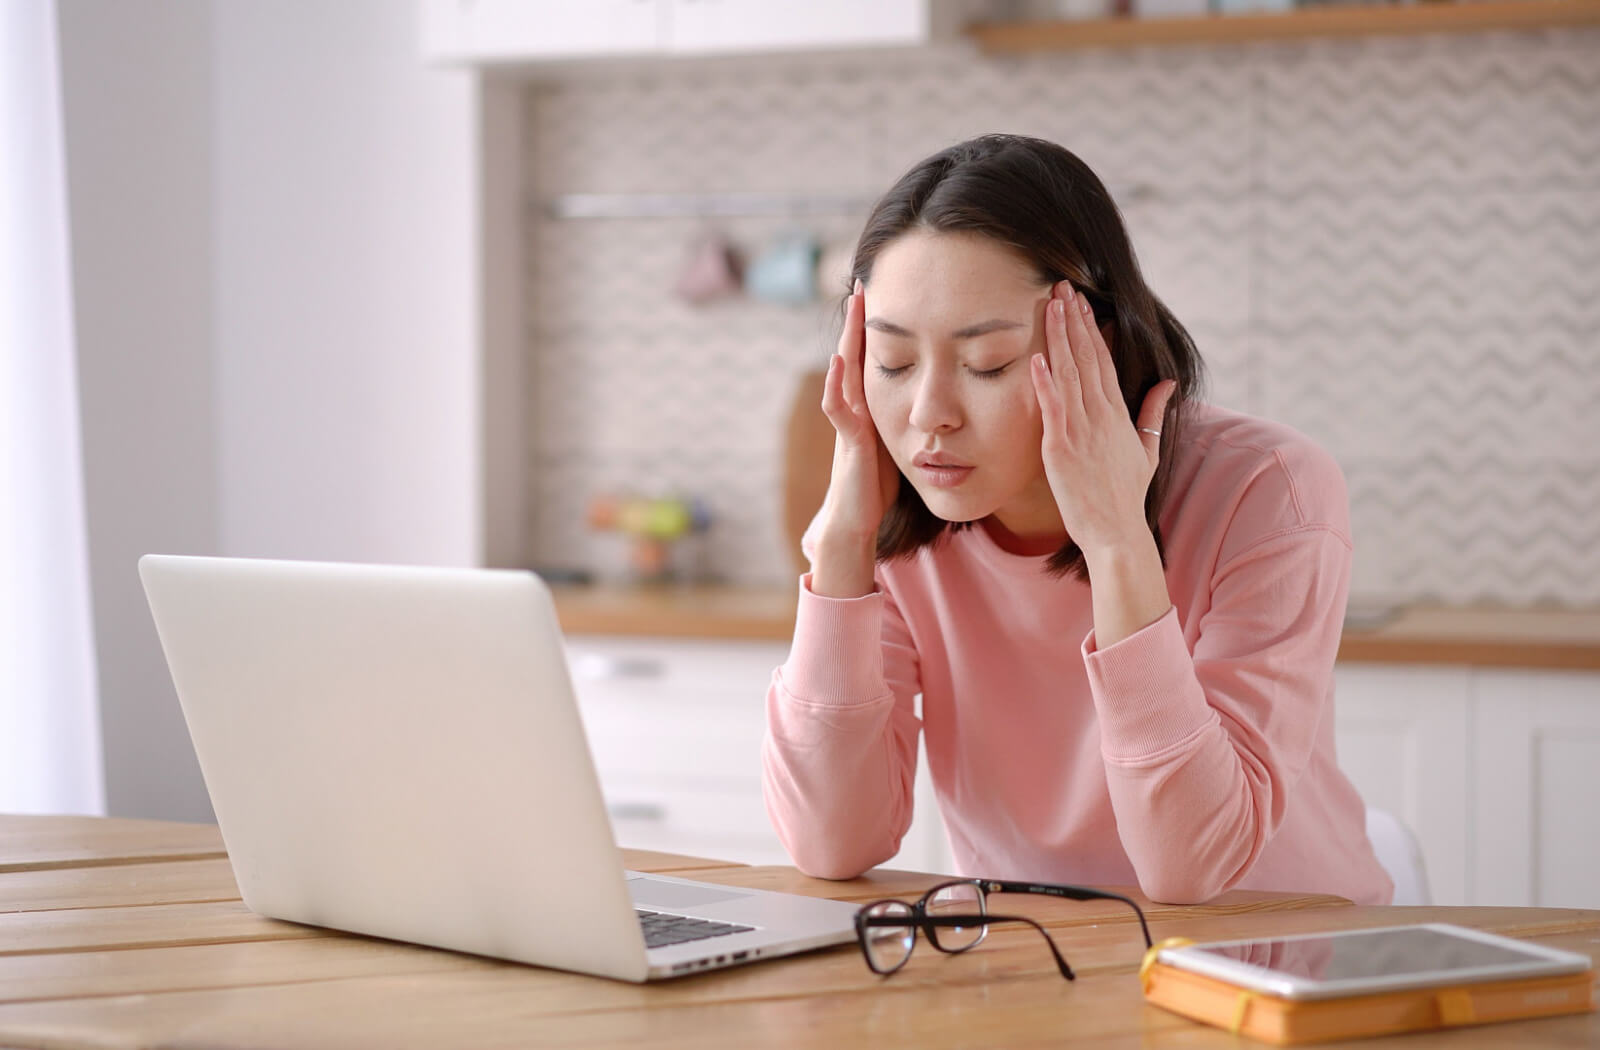 A woman that is sitting in front of her computer for long hours is experiencing eye strain and headaches, she is massaging her temper in both hands while her eyes are closed.